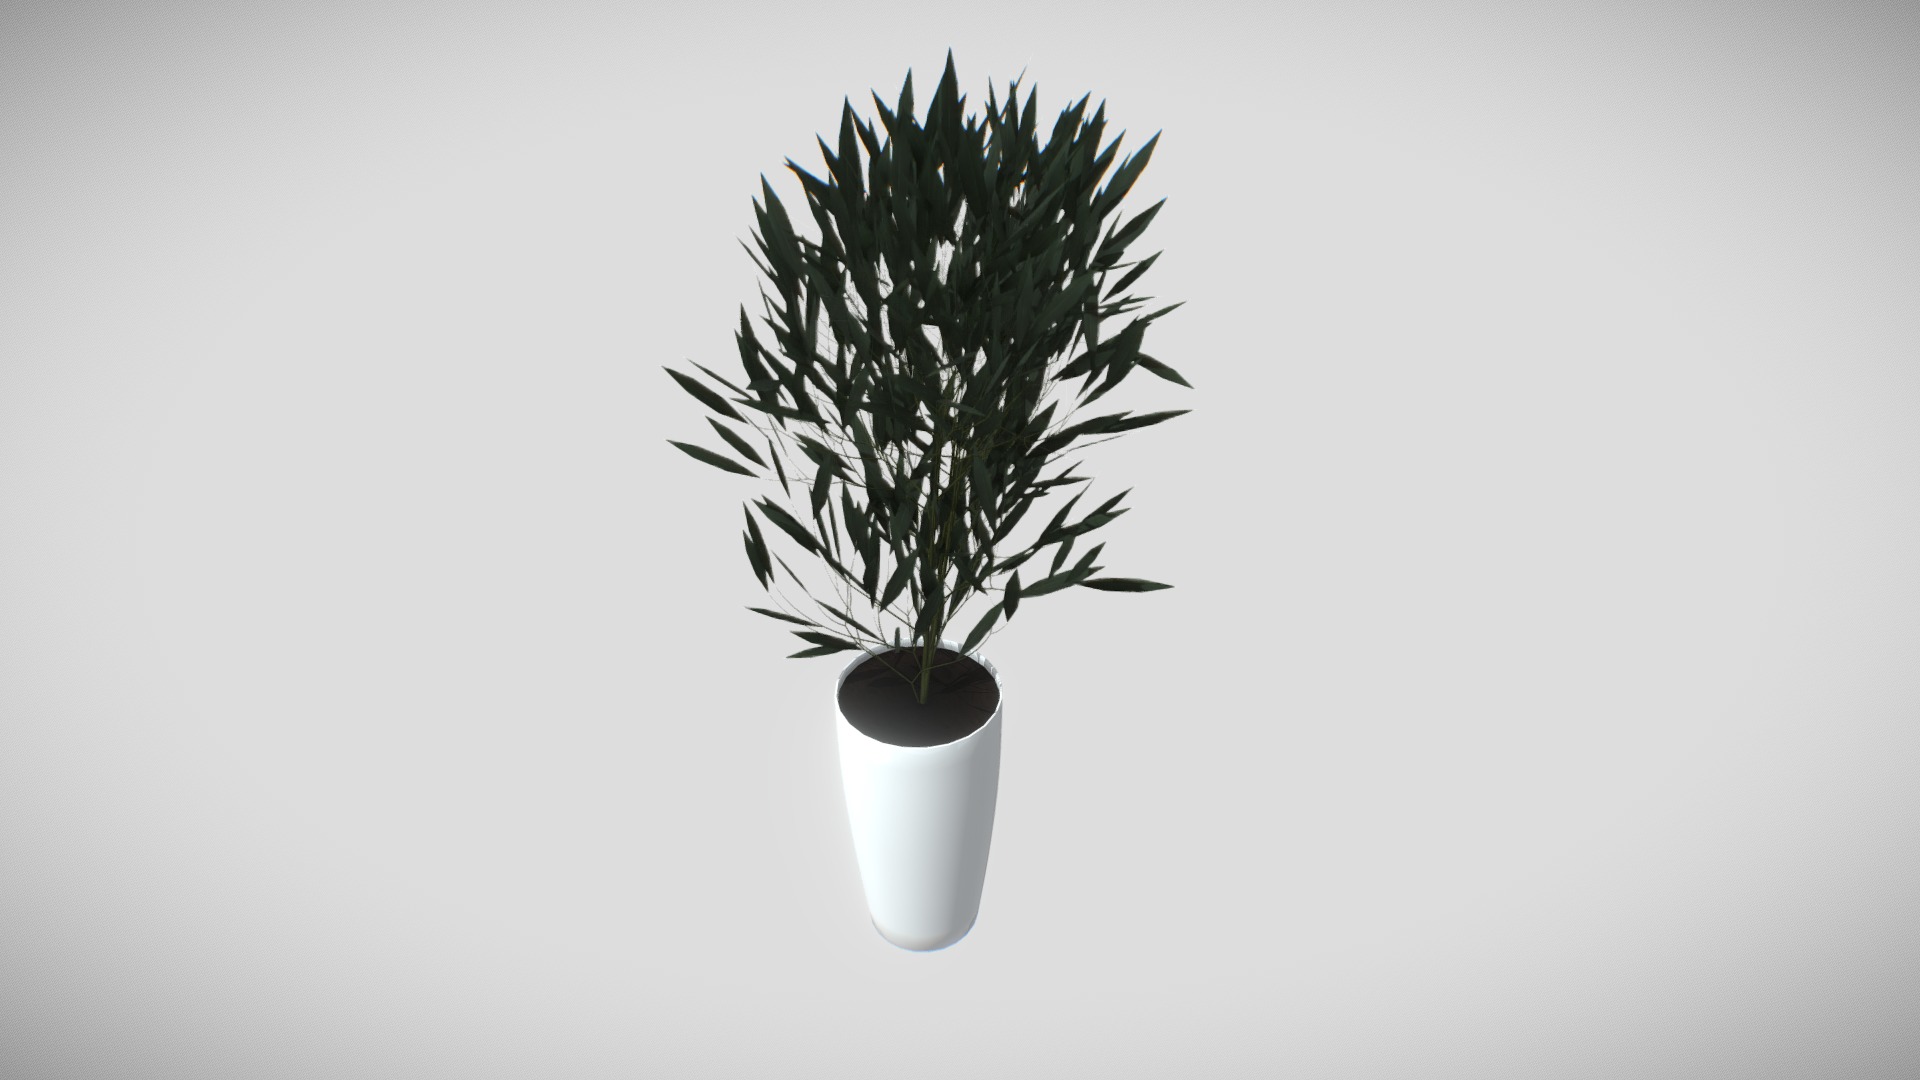 3D model Ficus plant - This is a 3D model of the Ficus plant. The 3D model is about a potted plant in a white vase.